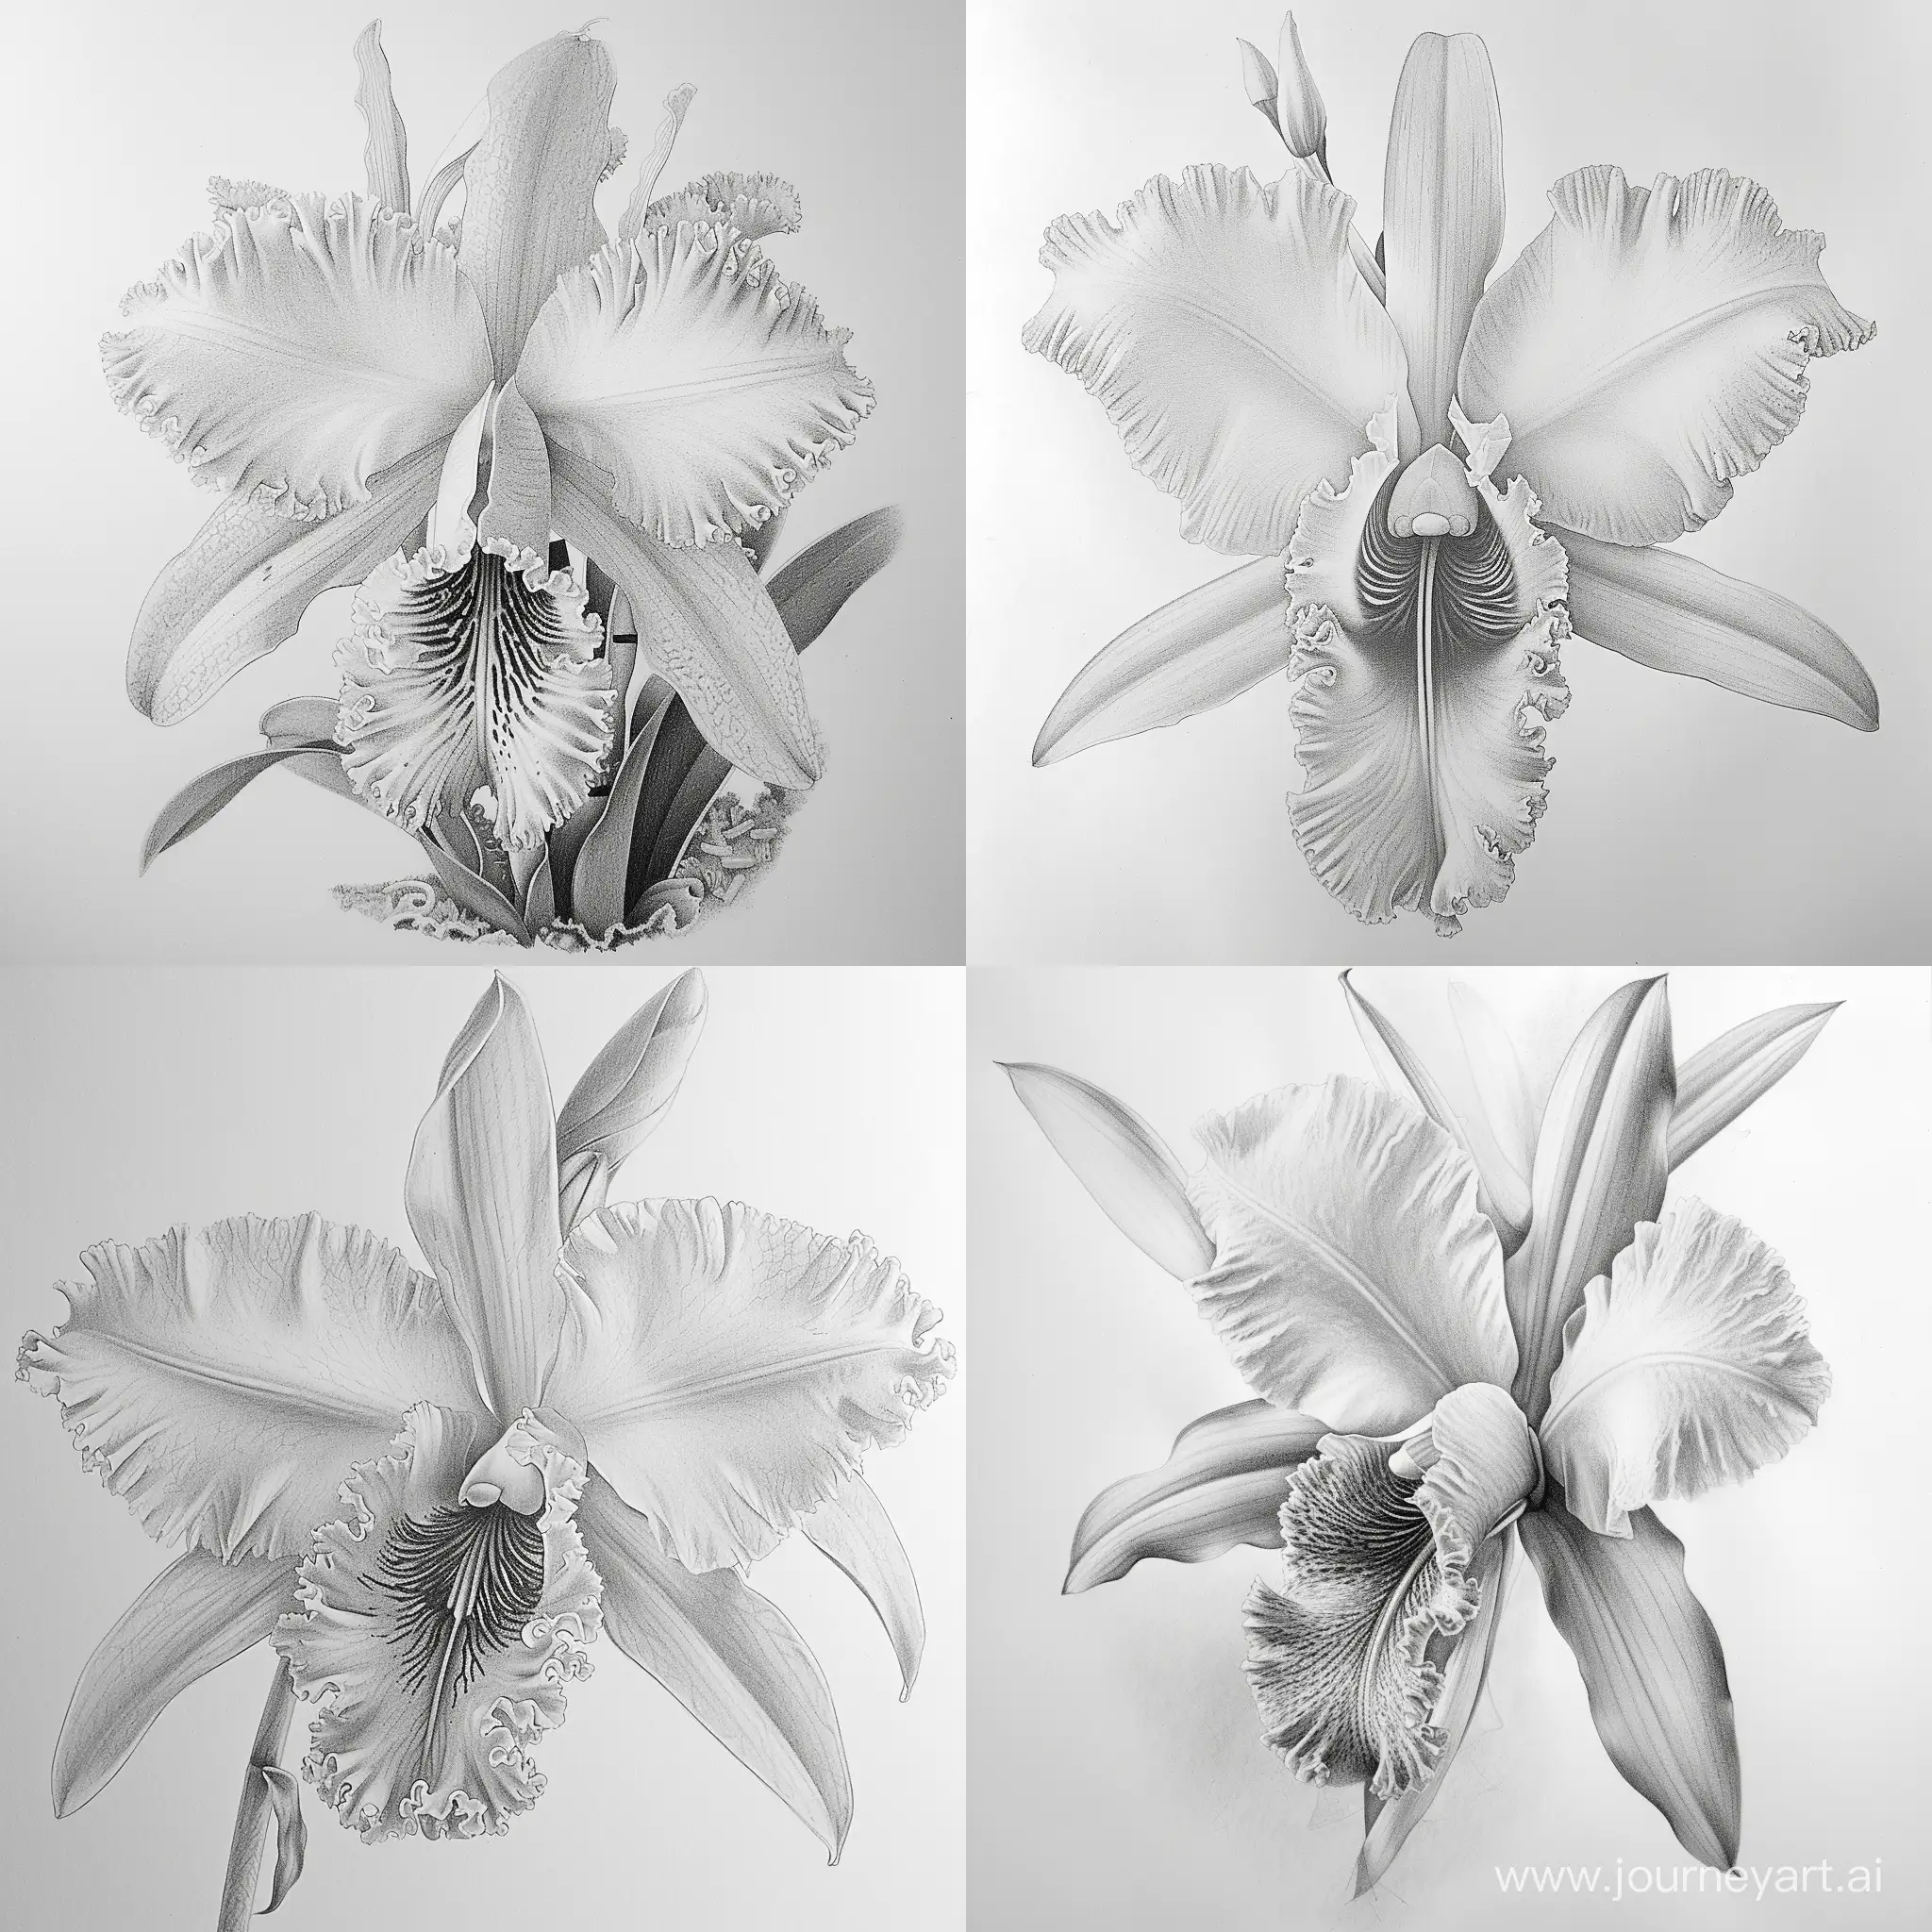 "Create a high-definition pencil drawing of a stunning orchid flower. The image should capture the intricate details of the orchid's delicate petals and its unique structure. The orchid should be the focal point, with its petals displaying a range of soft and subtle textures, showcasing the flower's elegant form and natural beauty. The pencil strokes should be fine and precise, emphasizing the flower's fine lines and shading, giving it a realistic and three-dimensional appearance. The background should be minimalistic or plain, ensuring that the orchid stands out as the main subject. The overall tone of the drawing should convey a sense of serenity and natural elegance."